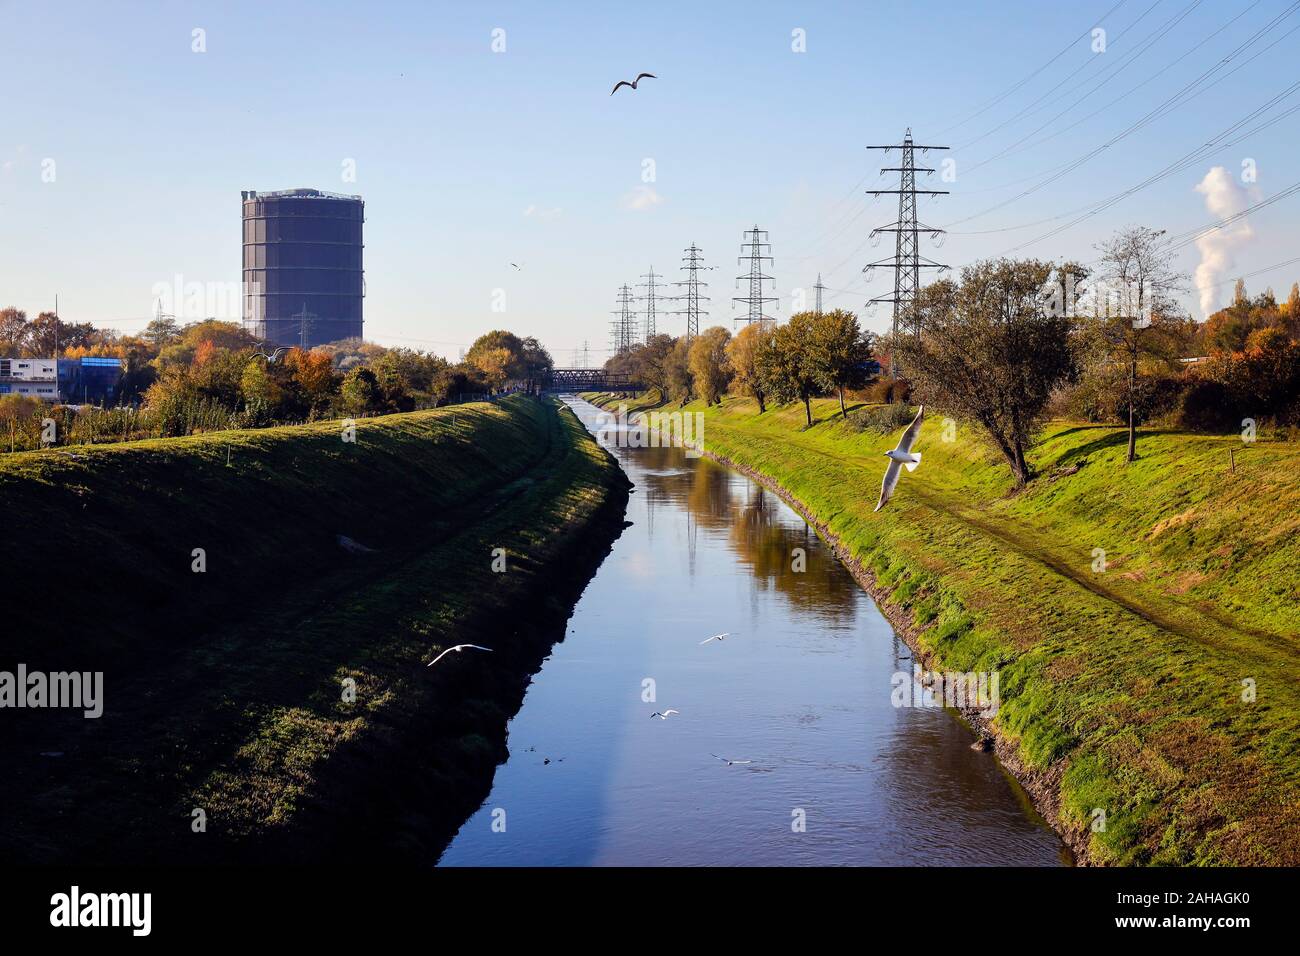 10.11.2019, Oberhausen, North Rhine-Westphalia, Germany - Emscher, in this not yet renaturalized river section, sewage is still being discharged. With Stock Photo